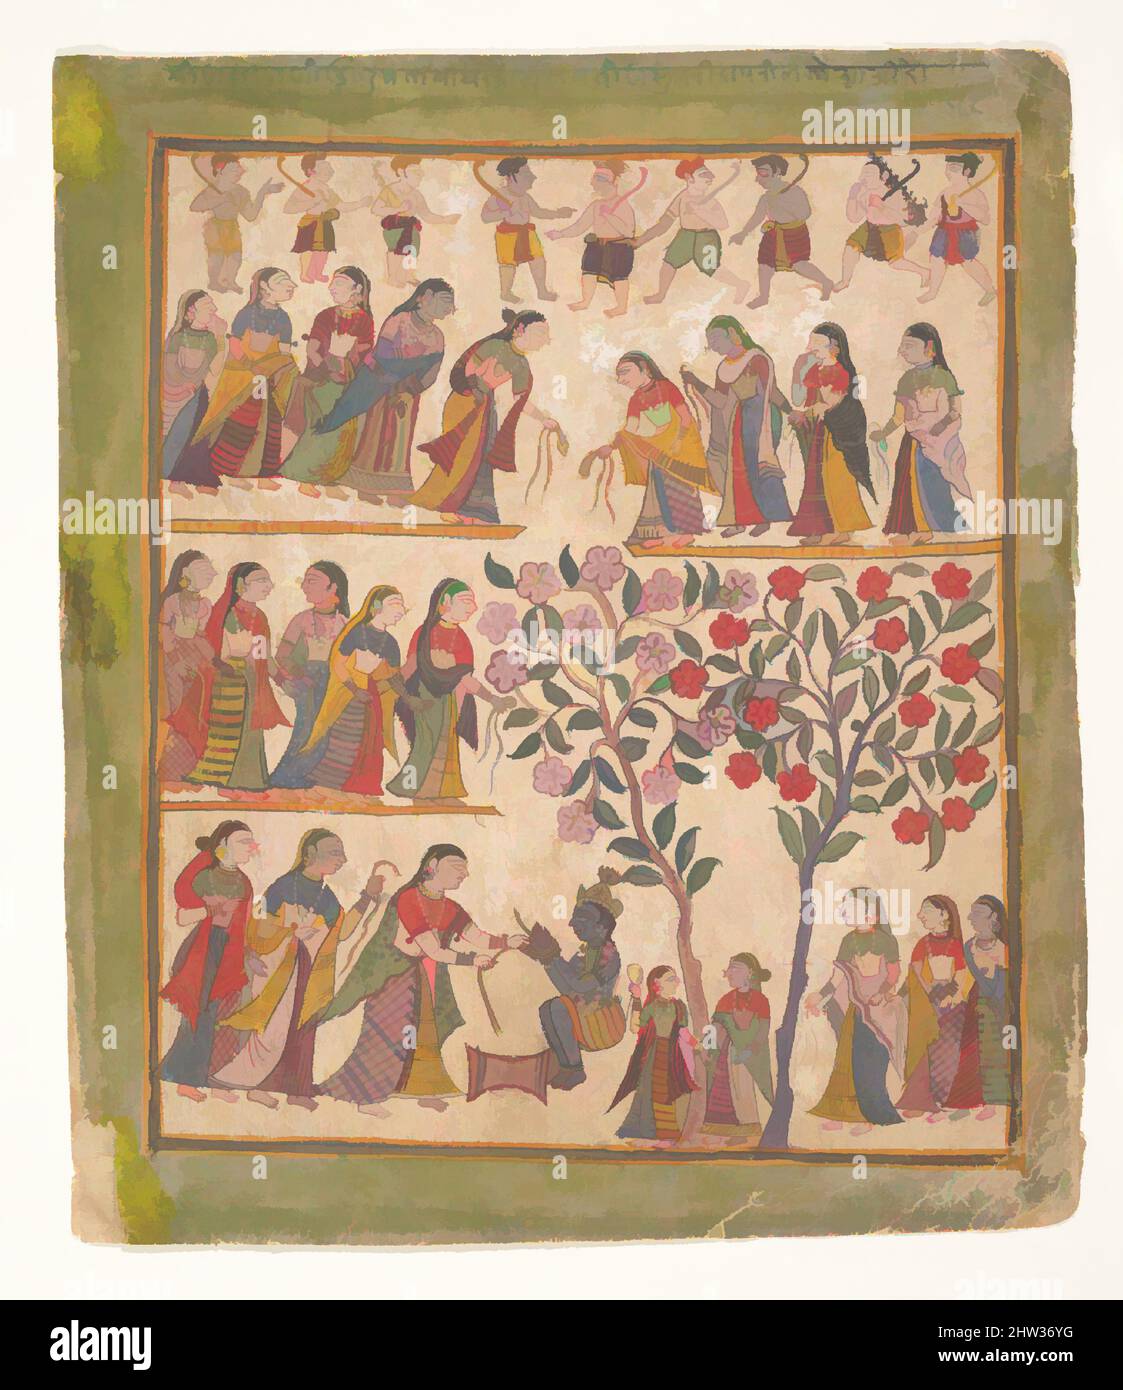 Art inspired by Yashoda Binds Krishna’s Hands: Page from a Dispersed Bhagavata Purana Manuscript, 1640–50, India (Gujarat), Ink and opaque watercolor on paper, 10 3/8 x 8 7/8 in. (26.4 x 22.5 cm), Paintings, In a futile attempt to keep him from stealing butter, Krishna’s foster mother, Classic works modernized by Artotop with a splash of modernity. Shapes, color and value, eye-catching visual impact on art. Emotions through freedom of artworks in a contemporary way. A timeless message pursuing a wildly creative new direction. Artists turning to the digital medium and creating the Artotop NFT Stock Photo